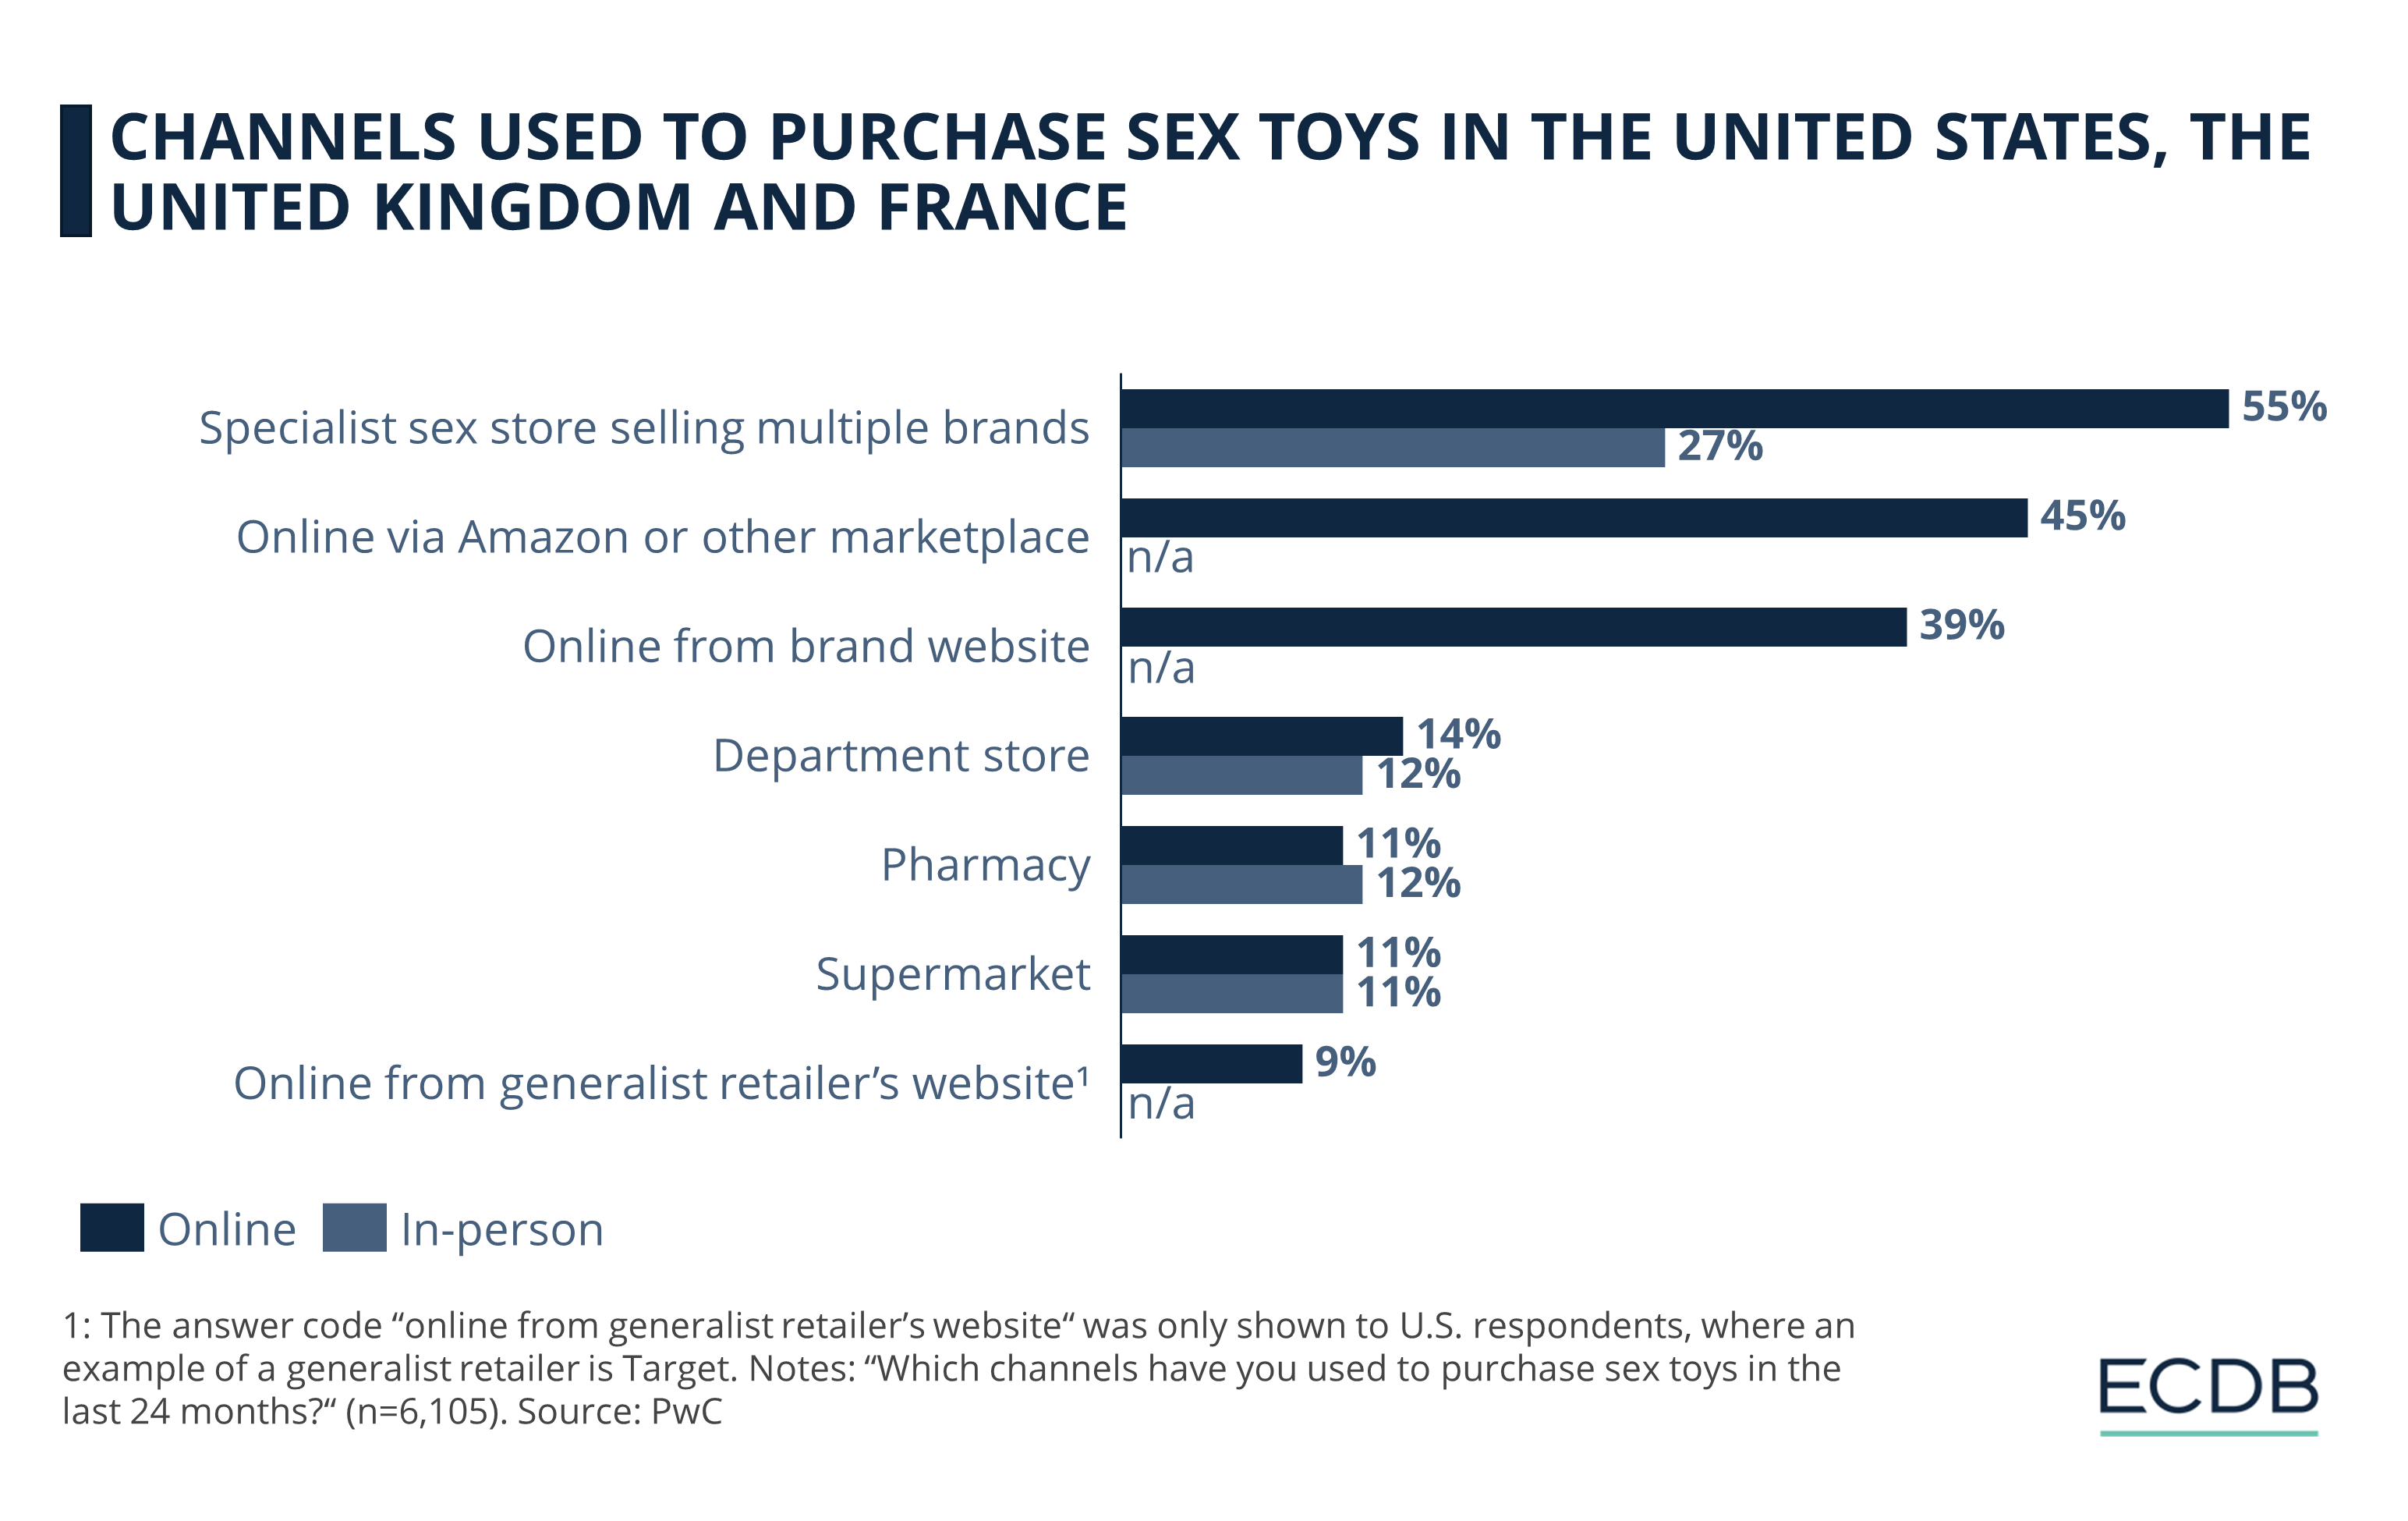 Channels Used to Purchase Sex Toys in the United States, the United Kingdom and France